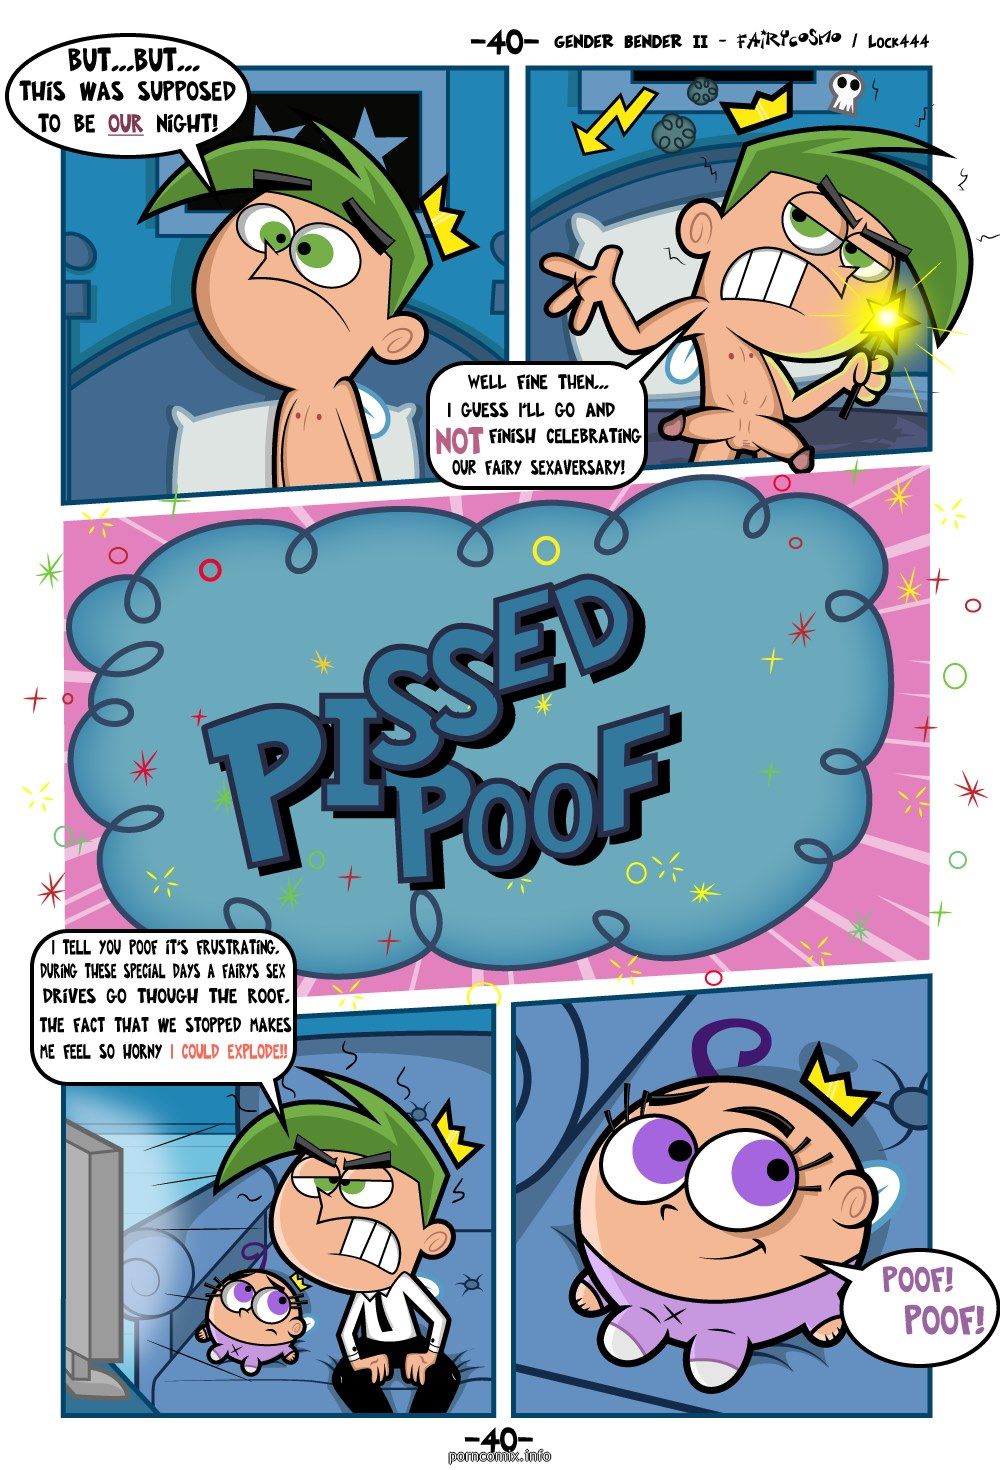 Fairly OddParents Gender Bender II [FairyCosmo] page 41